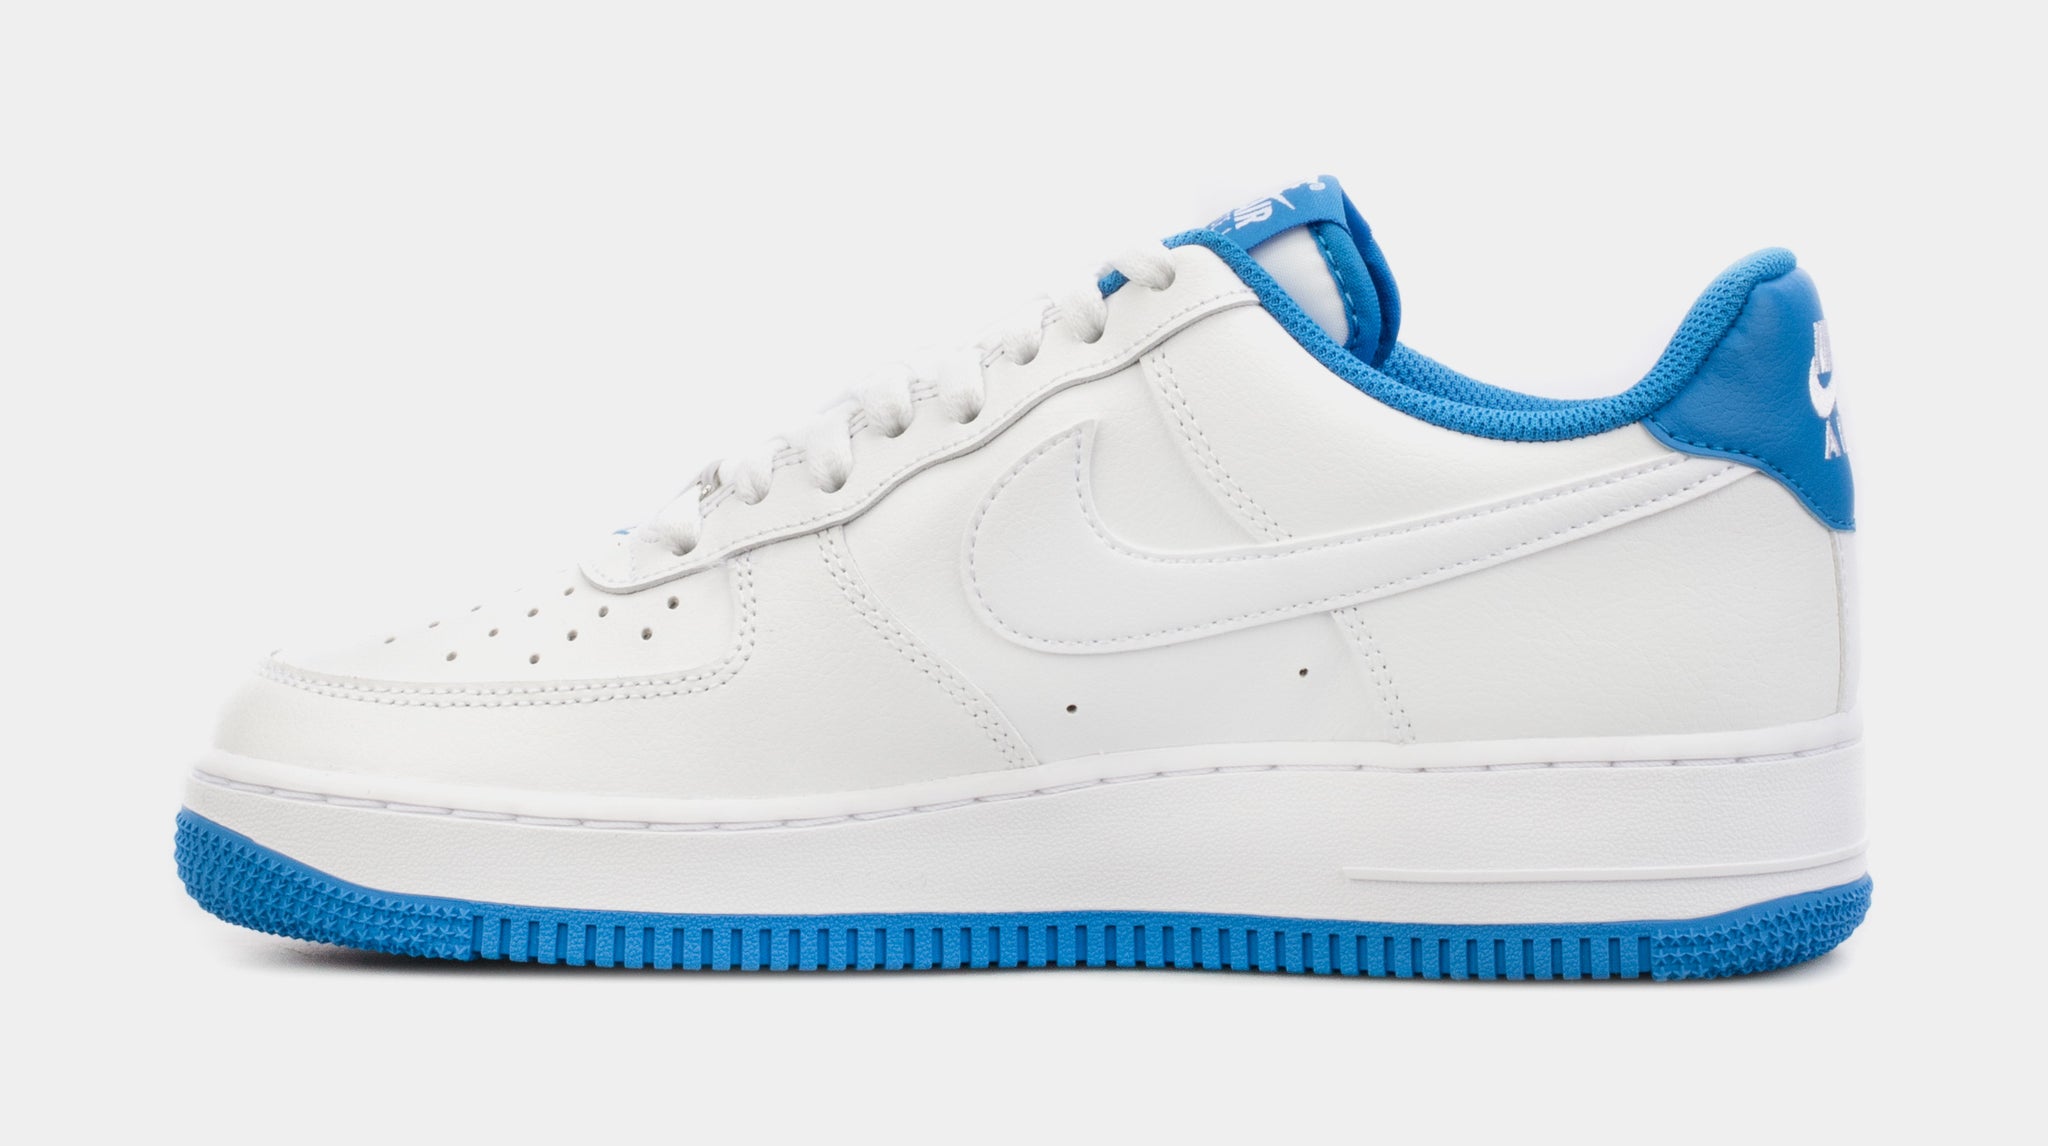 Nike Men's Air Force 1 '07 Shoes, Size 12, White/Blue/White